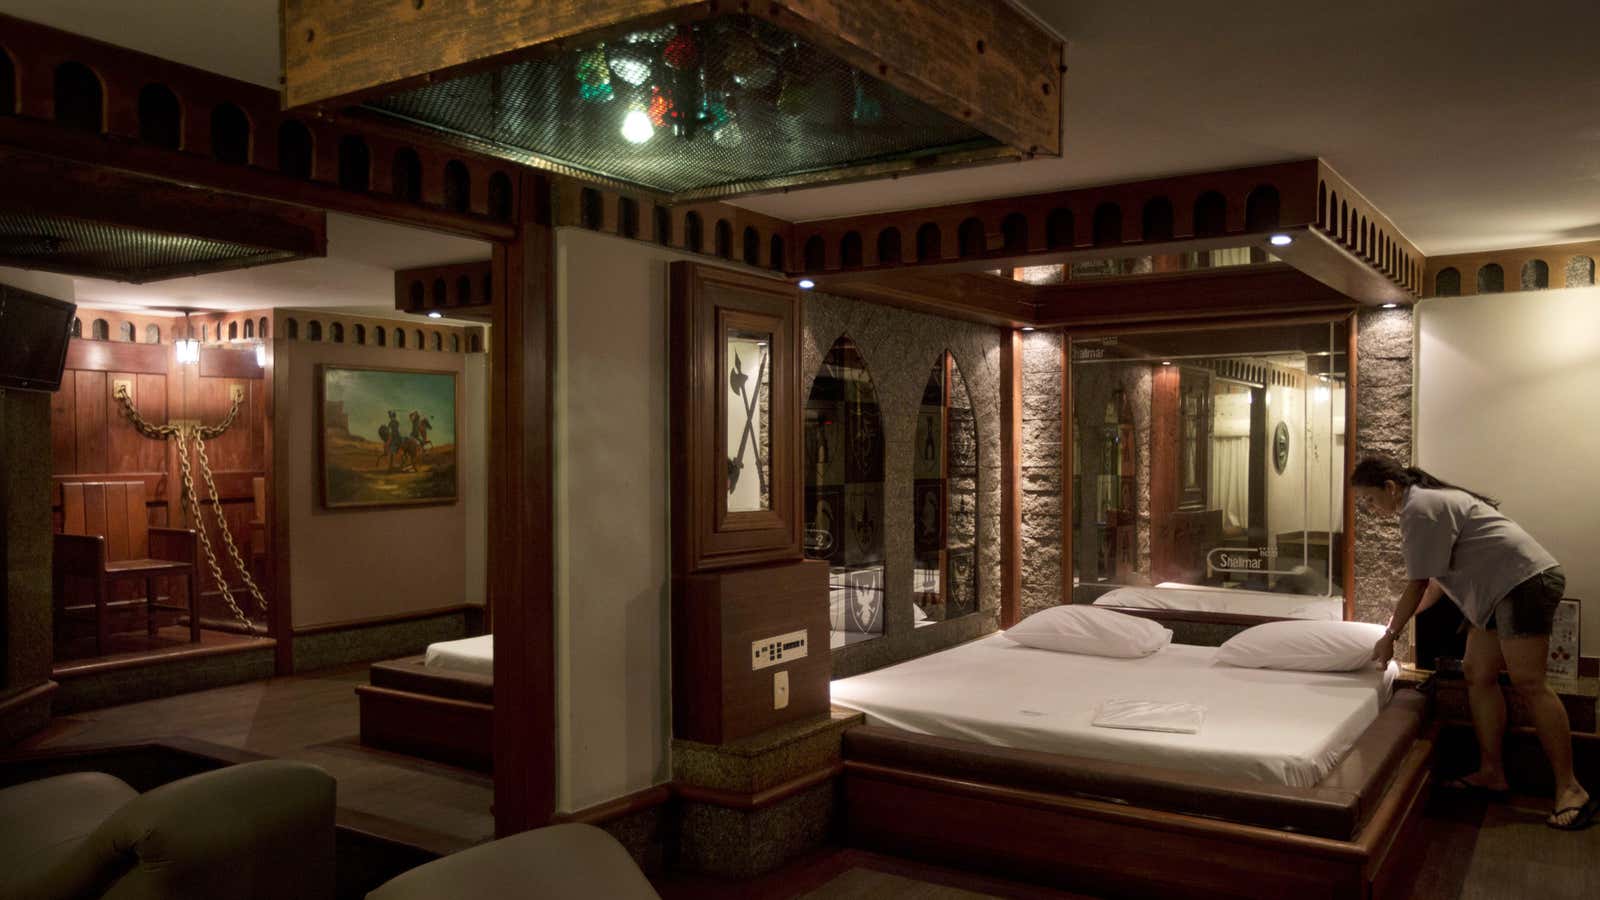 The Medieval Room at the Shalimar Hotel.